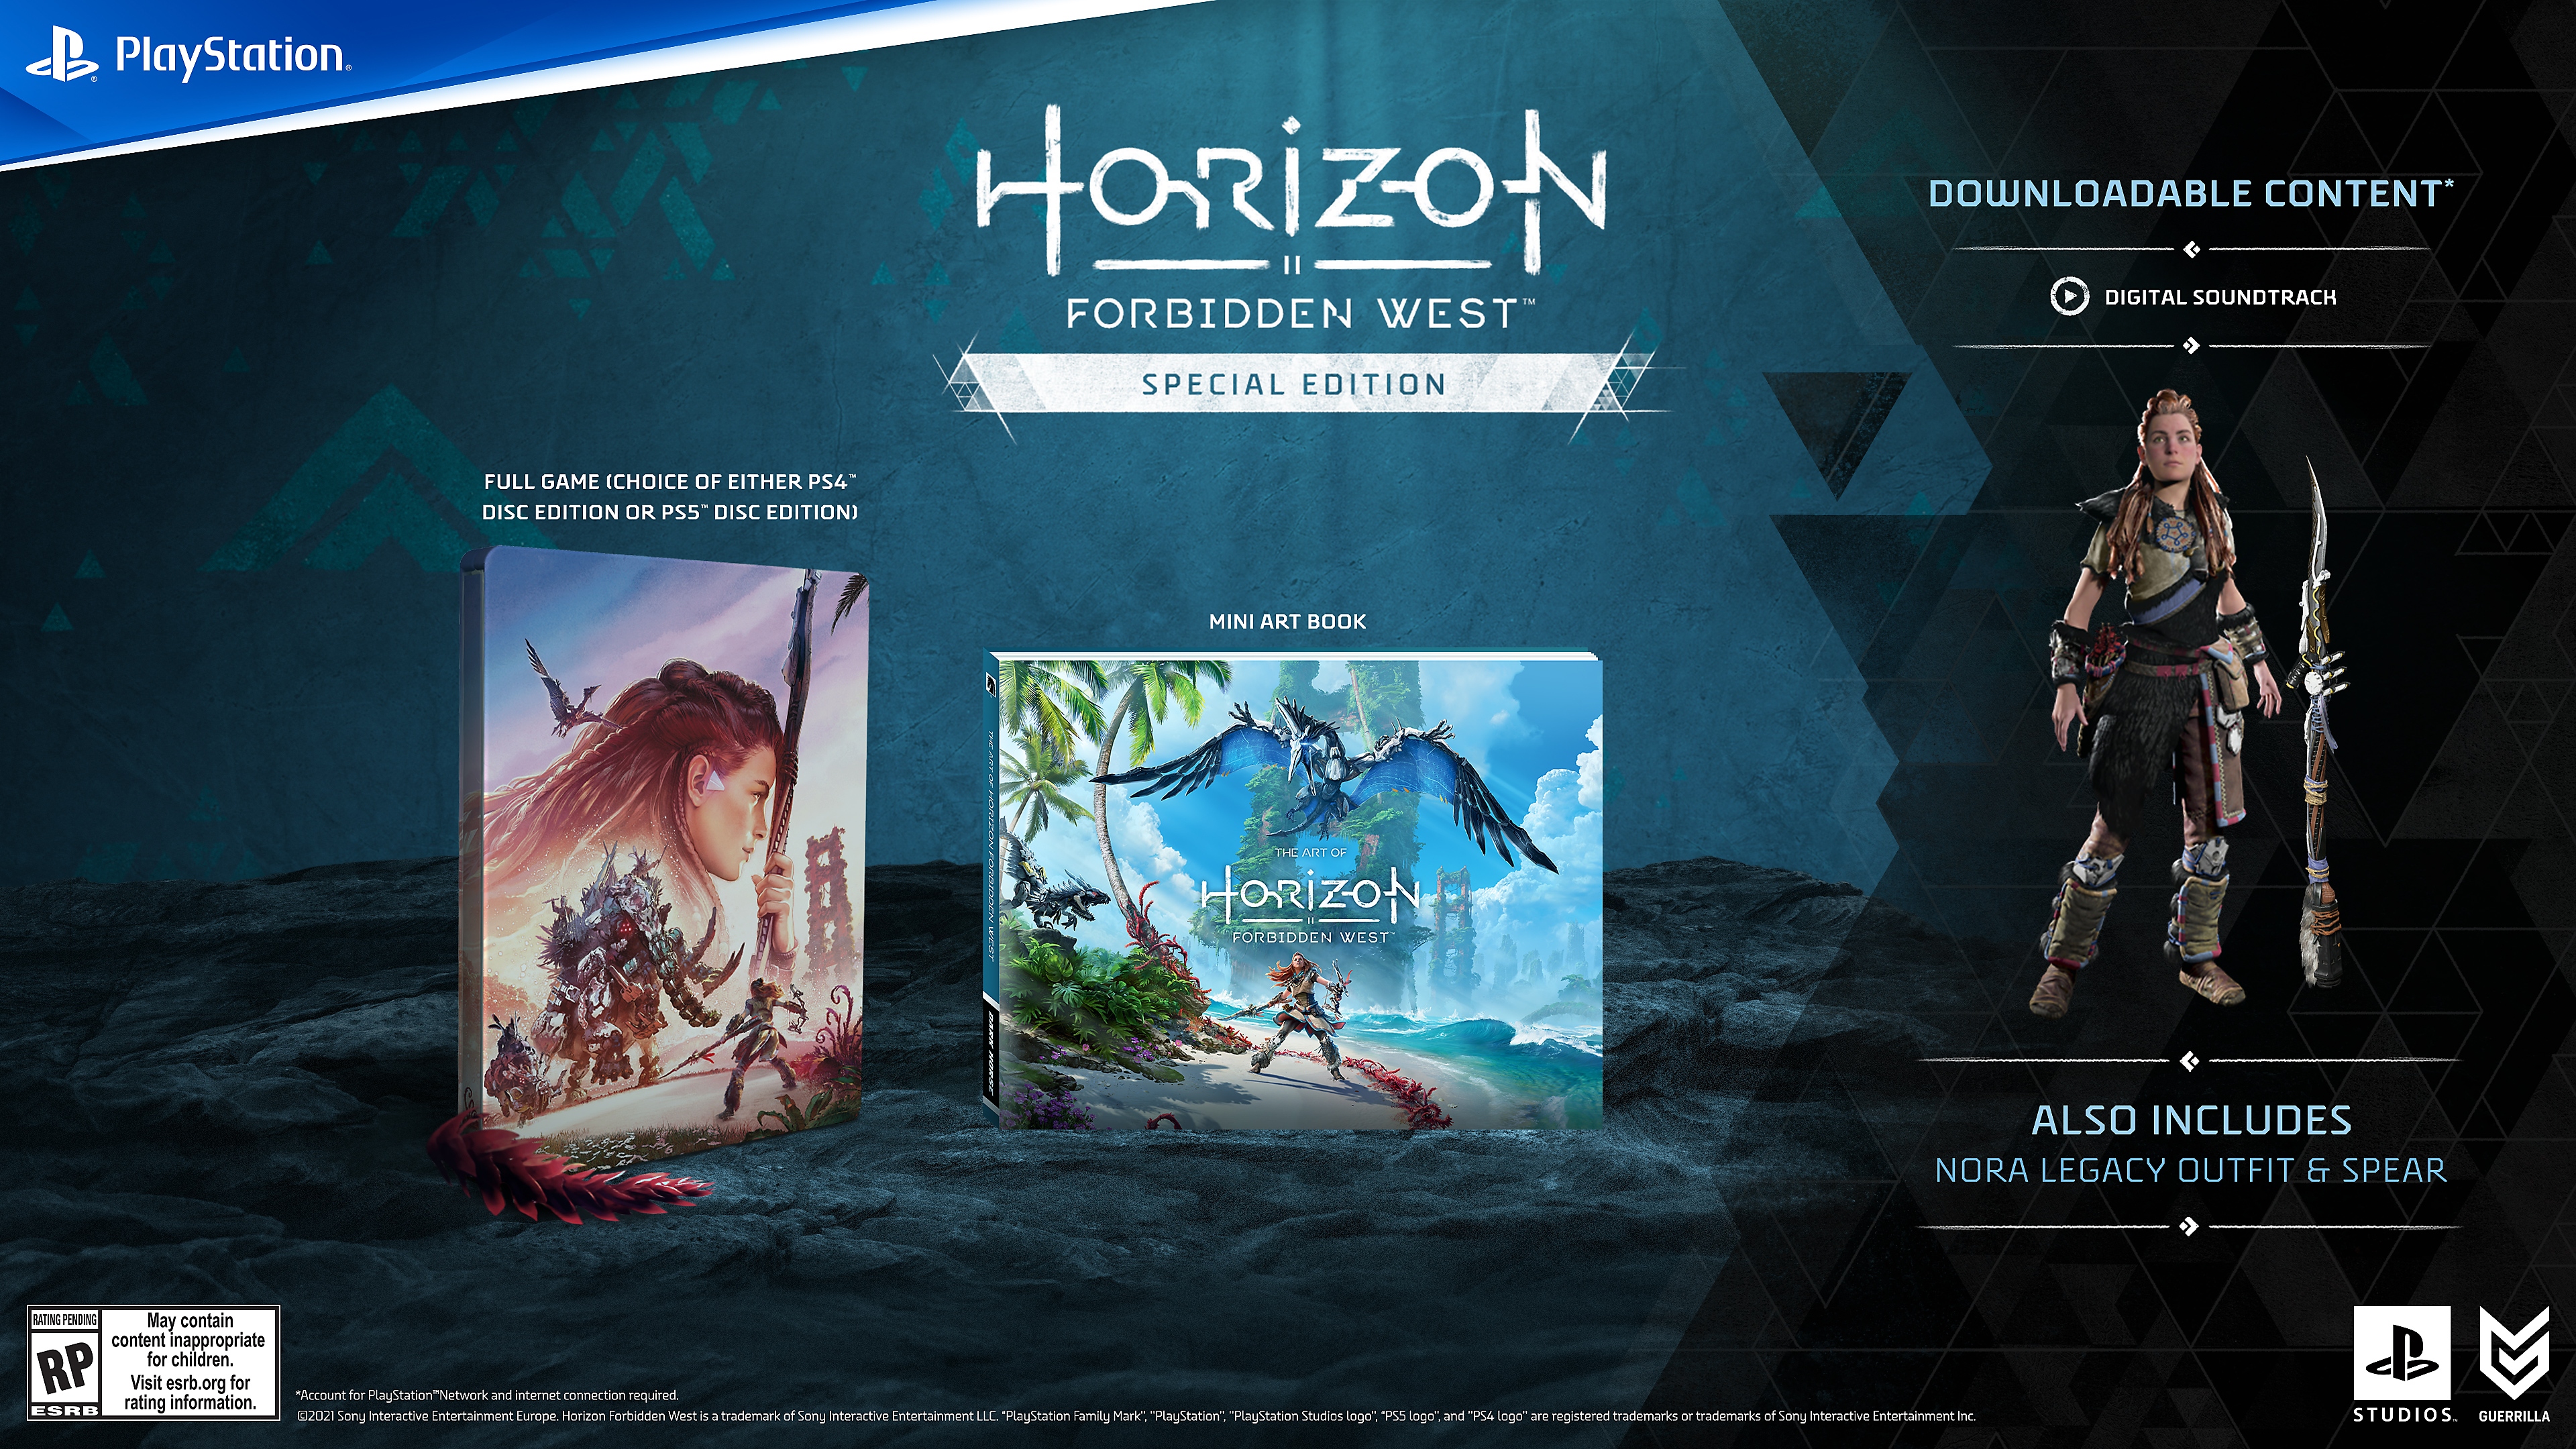 yarn Thunder To take care Horizon Forbidden West - Exclusive PS4 & PS5 Games | PlayStation (US)